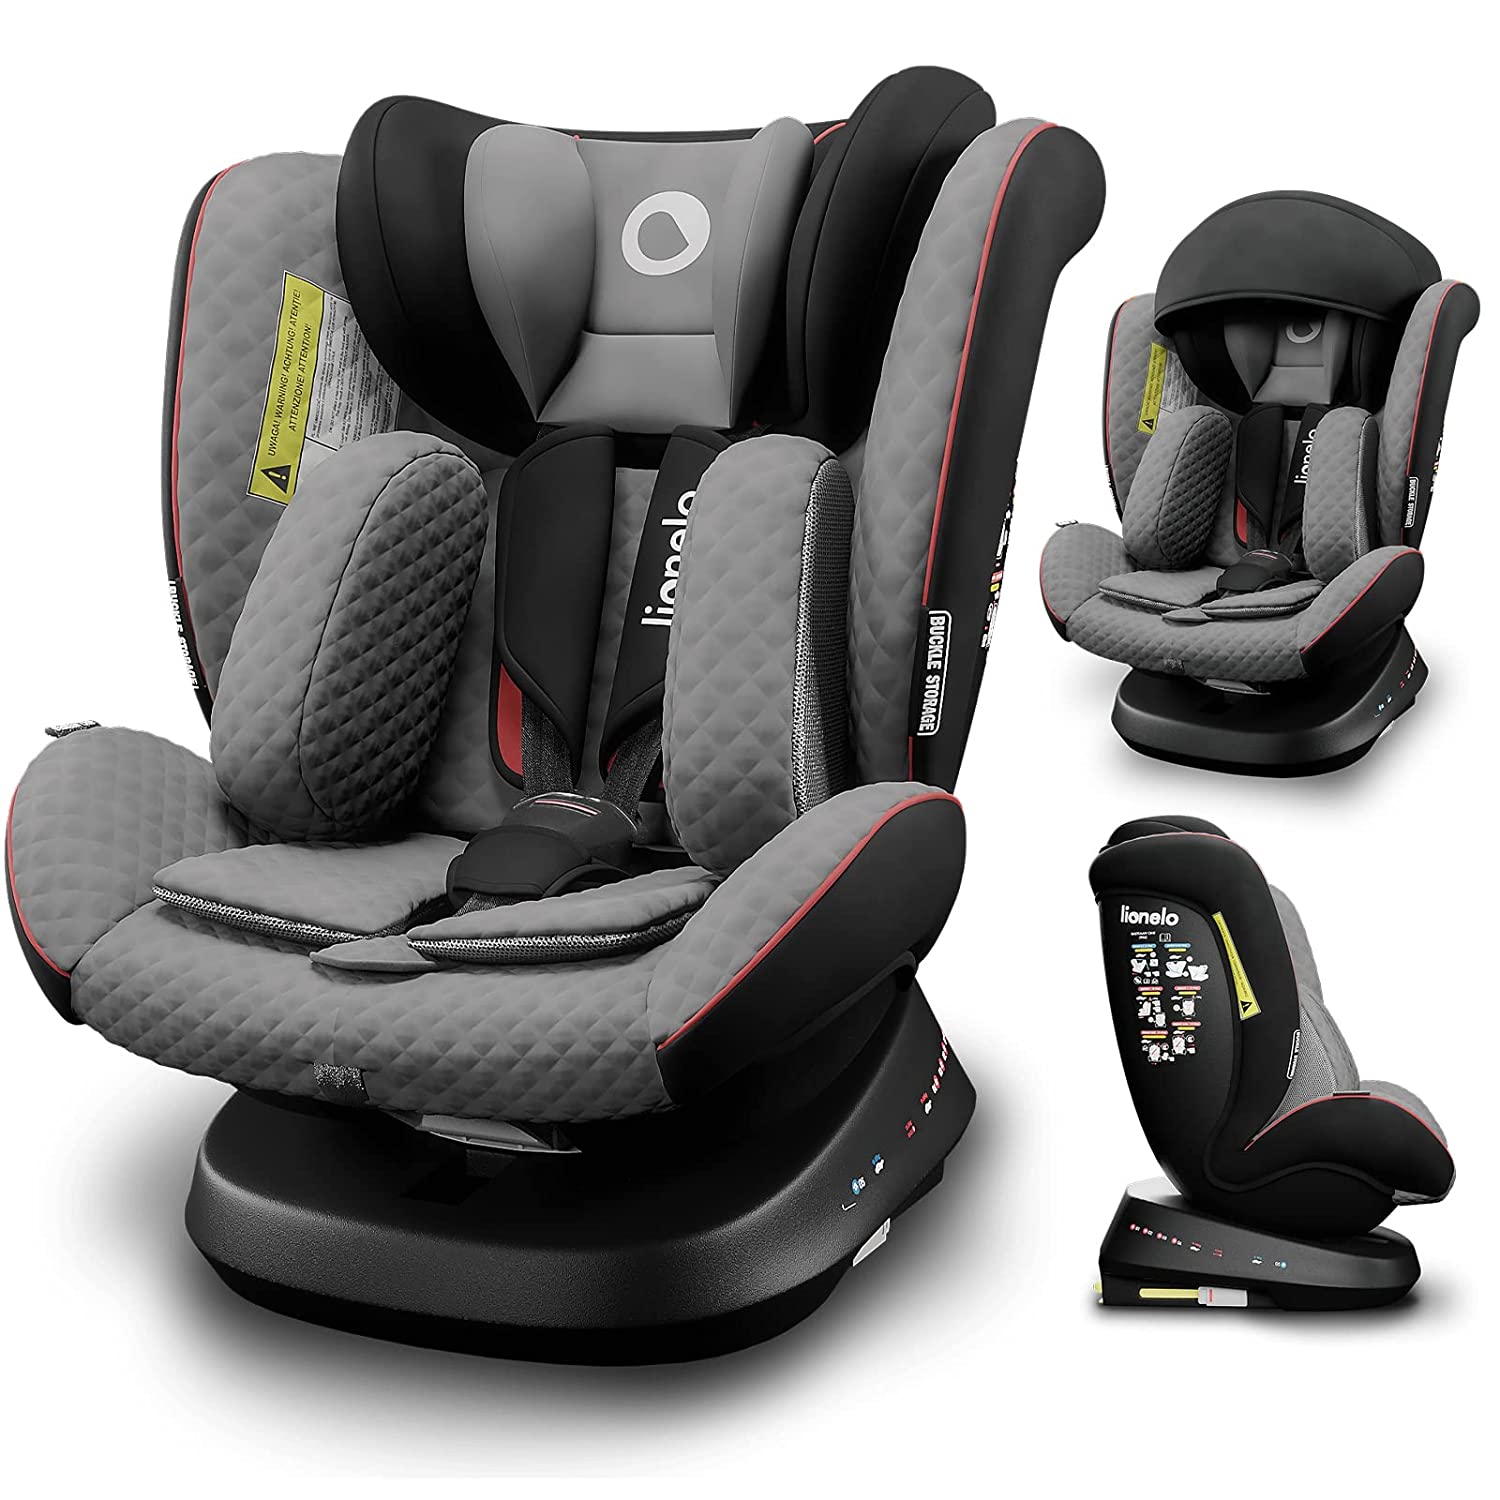 LIONELO Bastiaan One Child Seat from Birth 0-36 kg Isofix Top Tether 360 Degree Rotating Backwards Forward Side Protection 5-Point Seat Belts Dri-Seat (Grey/Black)